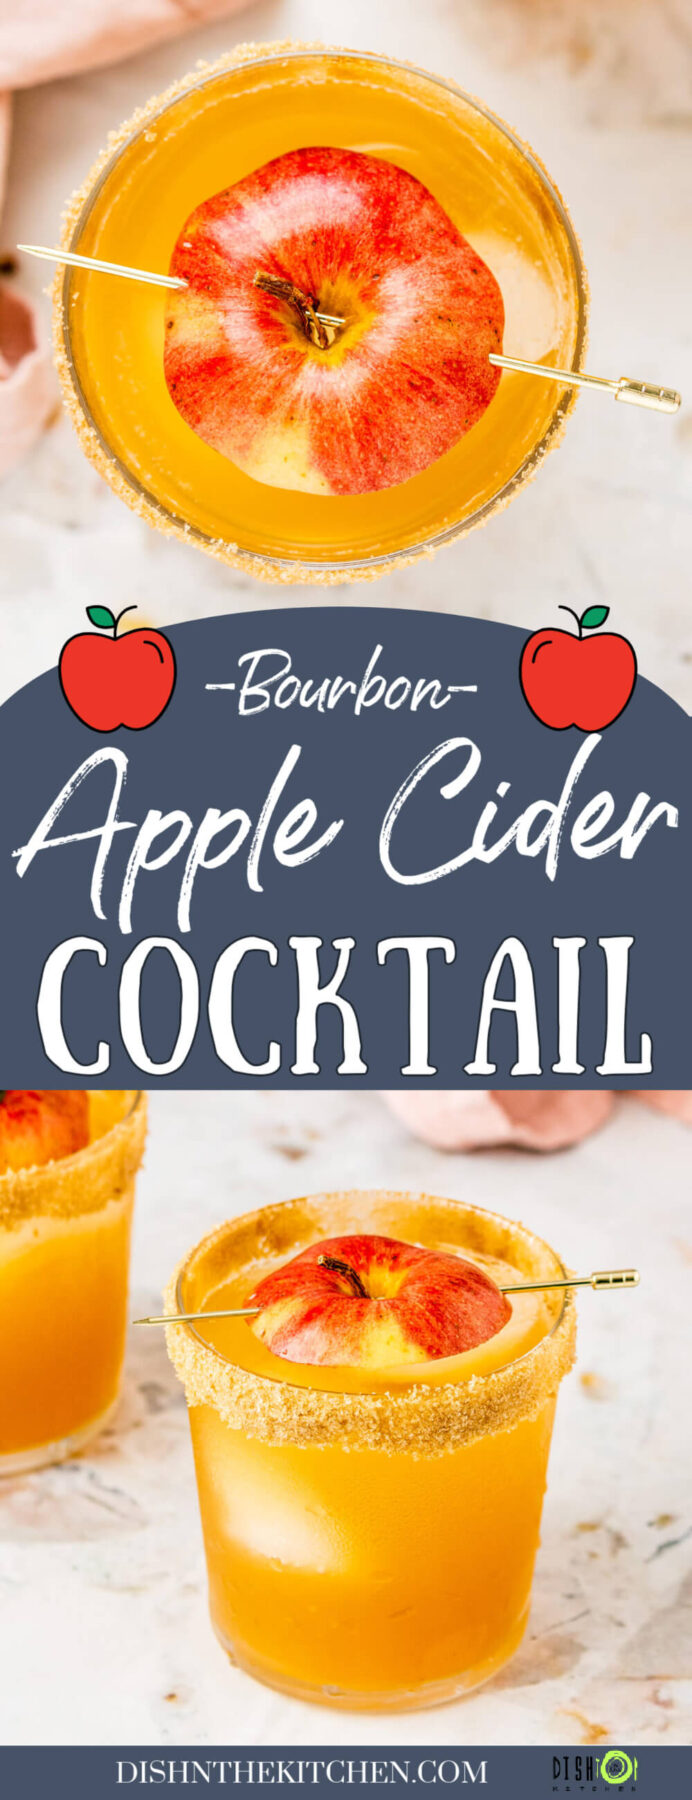 Pinterest image of two rocks glasses filled with apple cider cocktail garnished with apple tops.